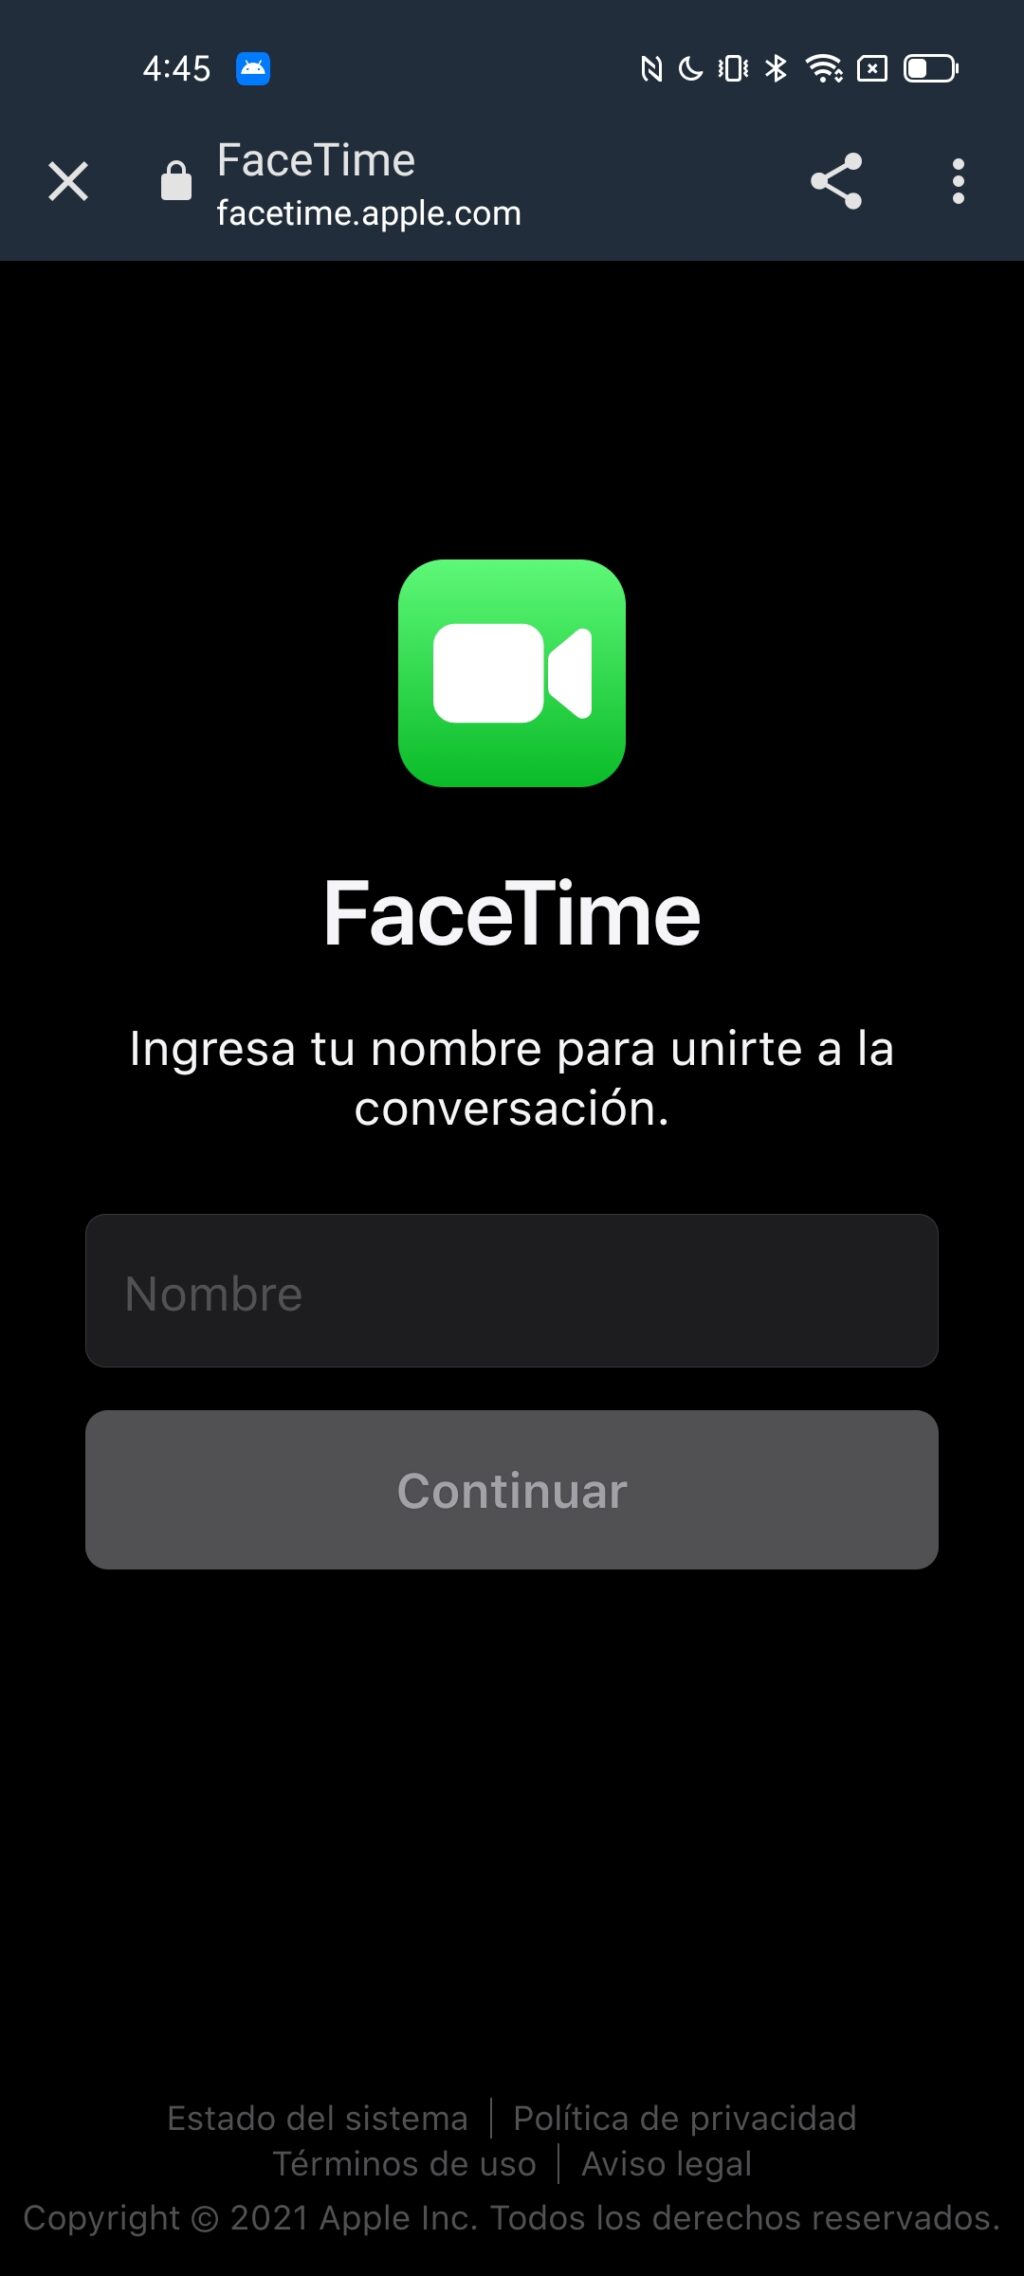 How to use FaceTime on Android and Windows